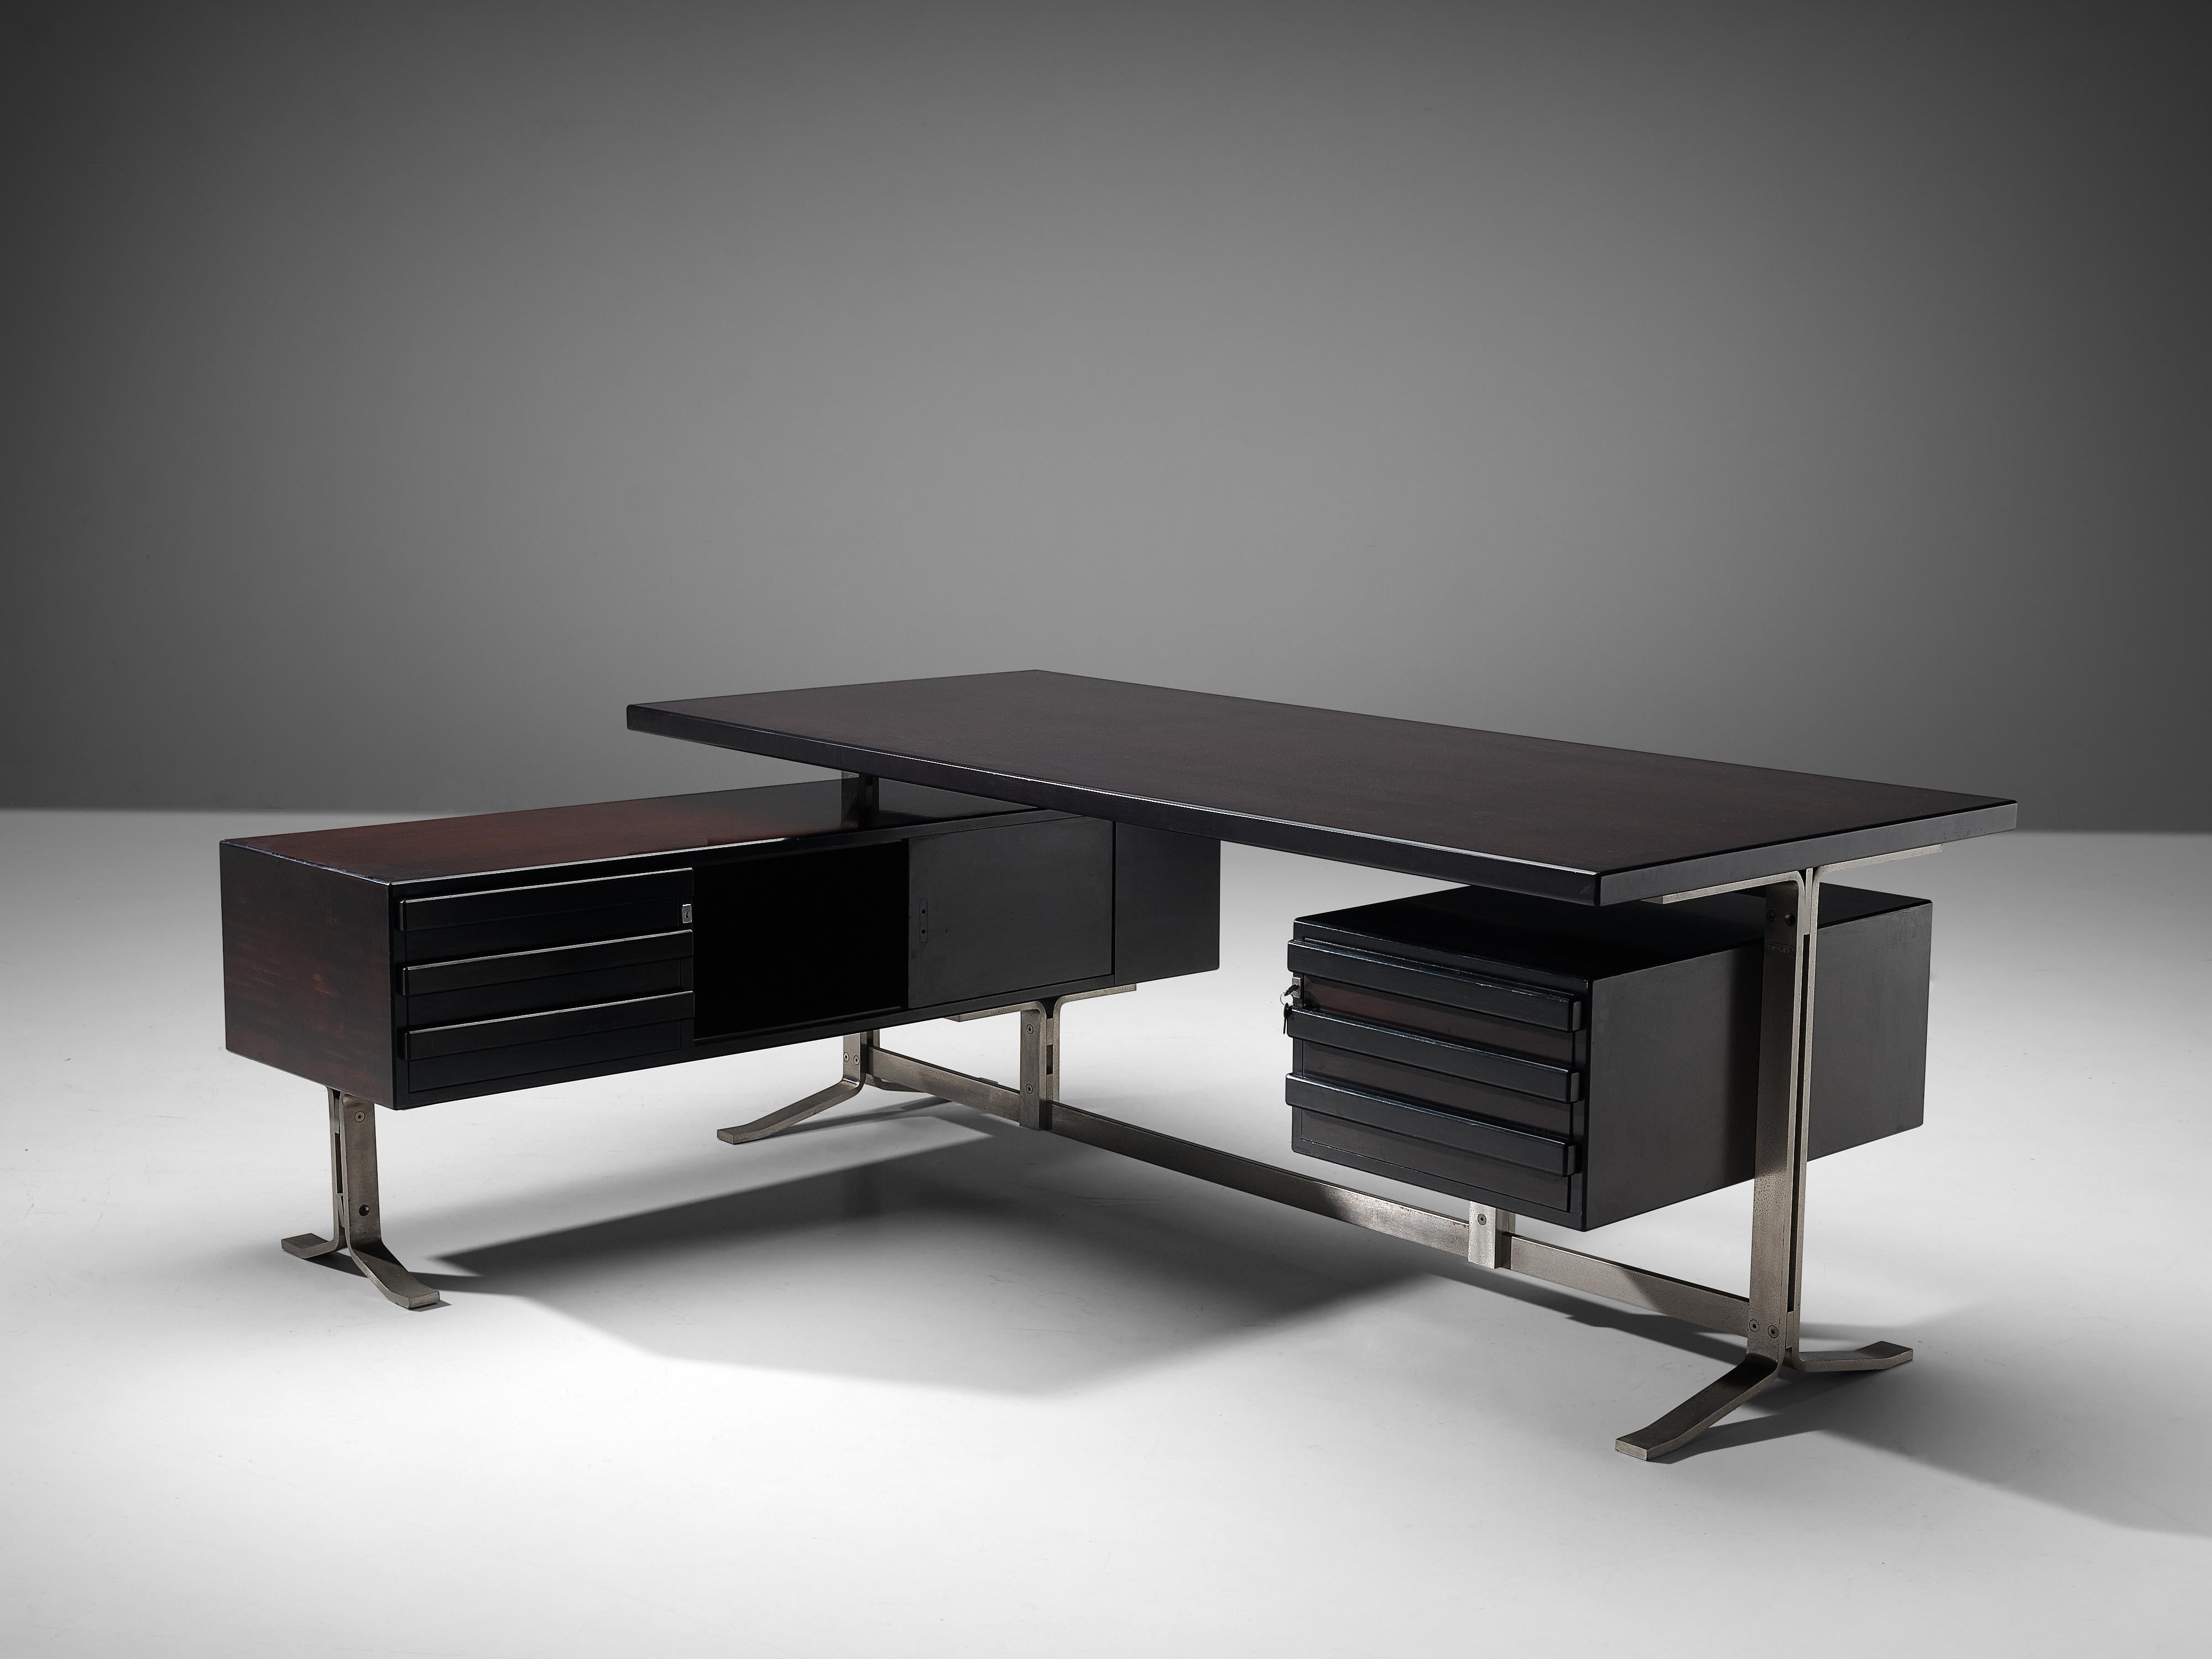 Gianni Moscatelli for Formanova, desk, stained mahogany, metal, Italy, 1960s

Moscatelli designed this functional, free-standing desk in the 1960s for Formanova. The main tabletop features a lockable drawer. A long, lower shelf completes the desk